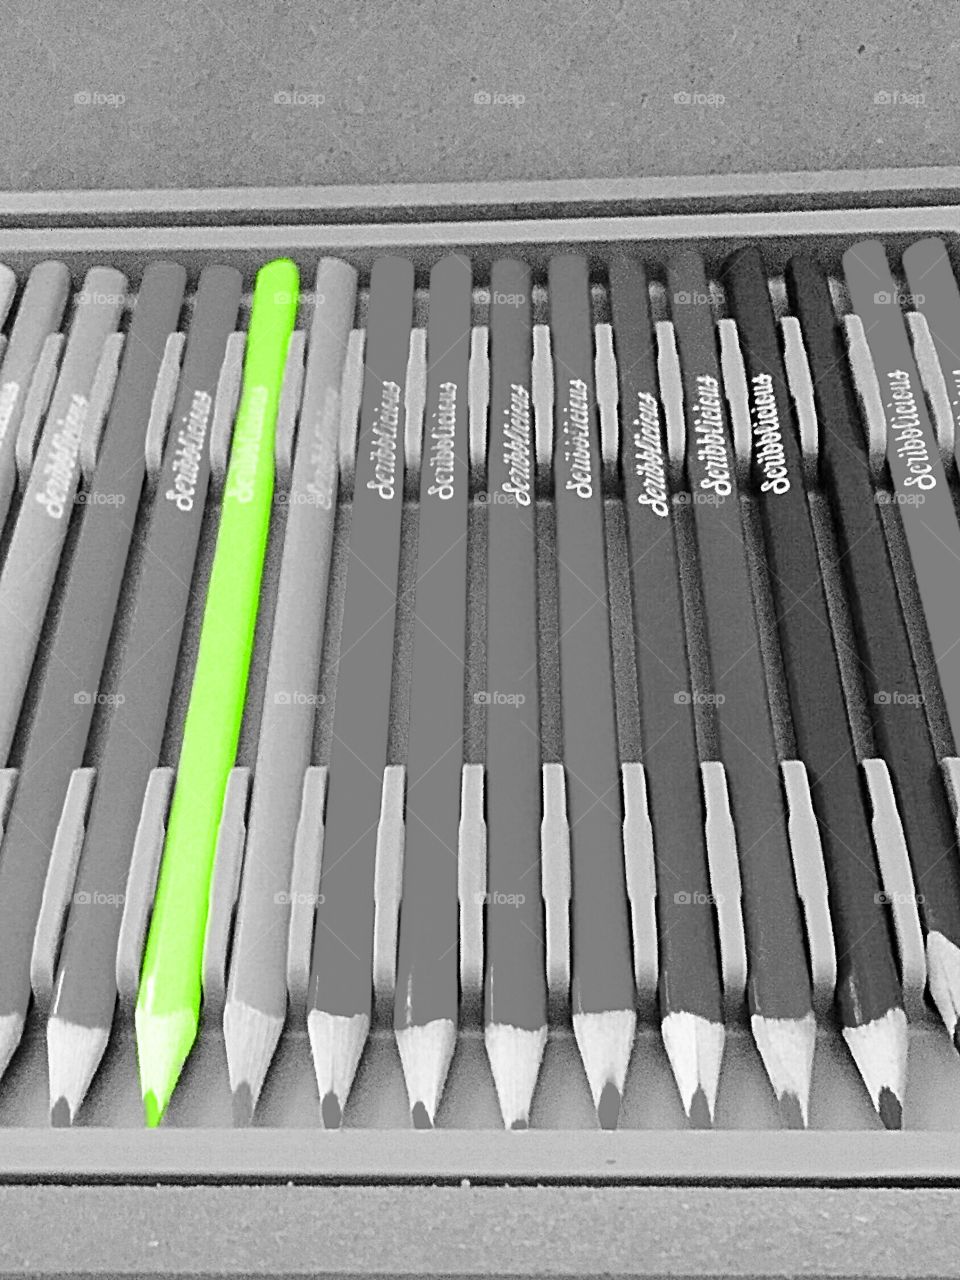 Green pencil. Colouring pencils with the green highlighted